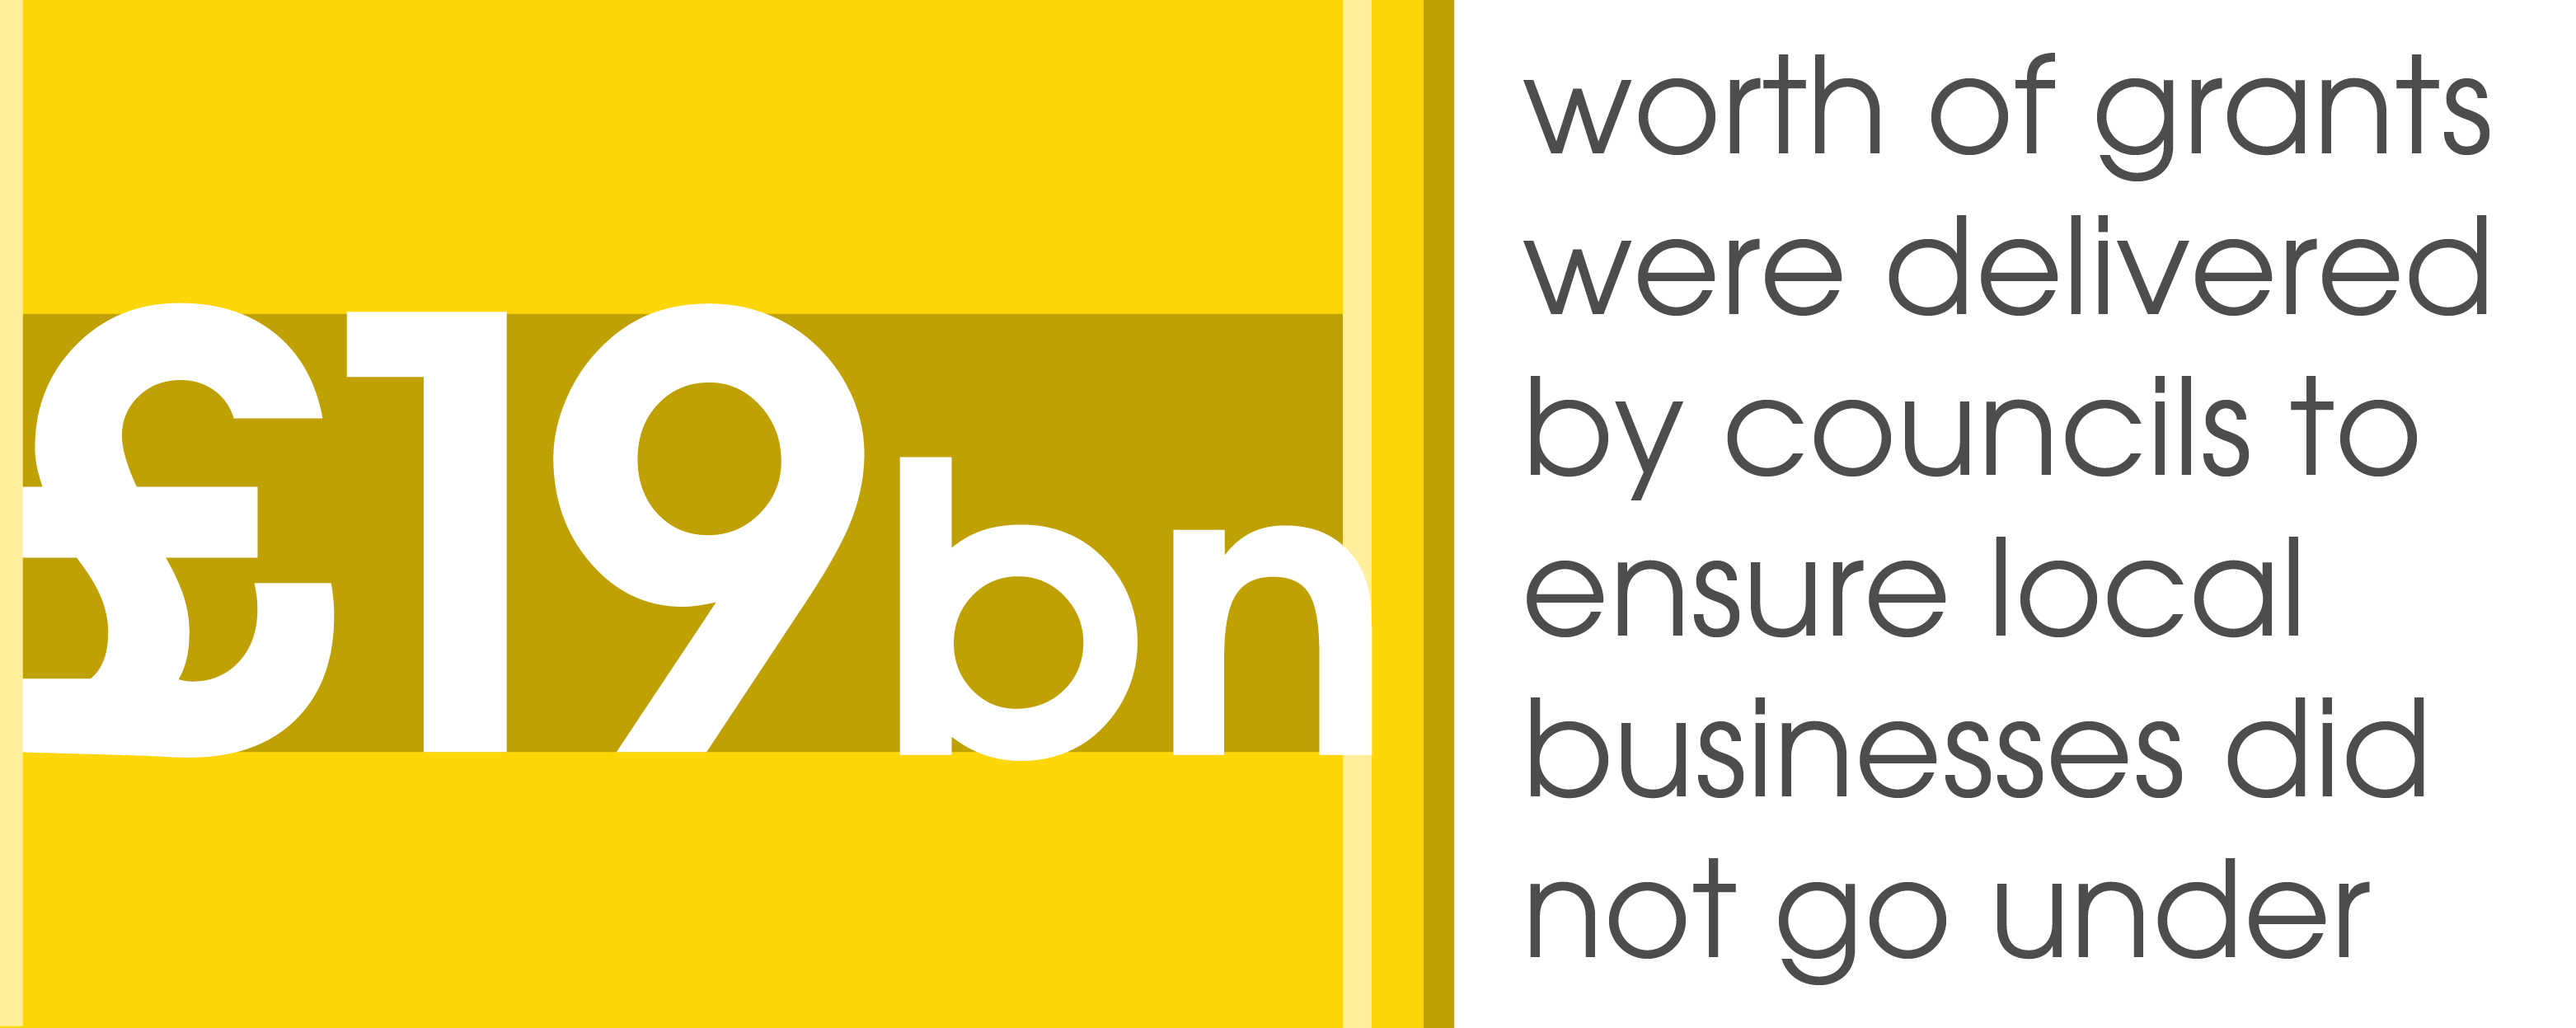 £19bn - worth of grants were delivered by councils to ensure local businesses did not go under.